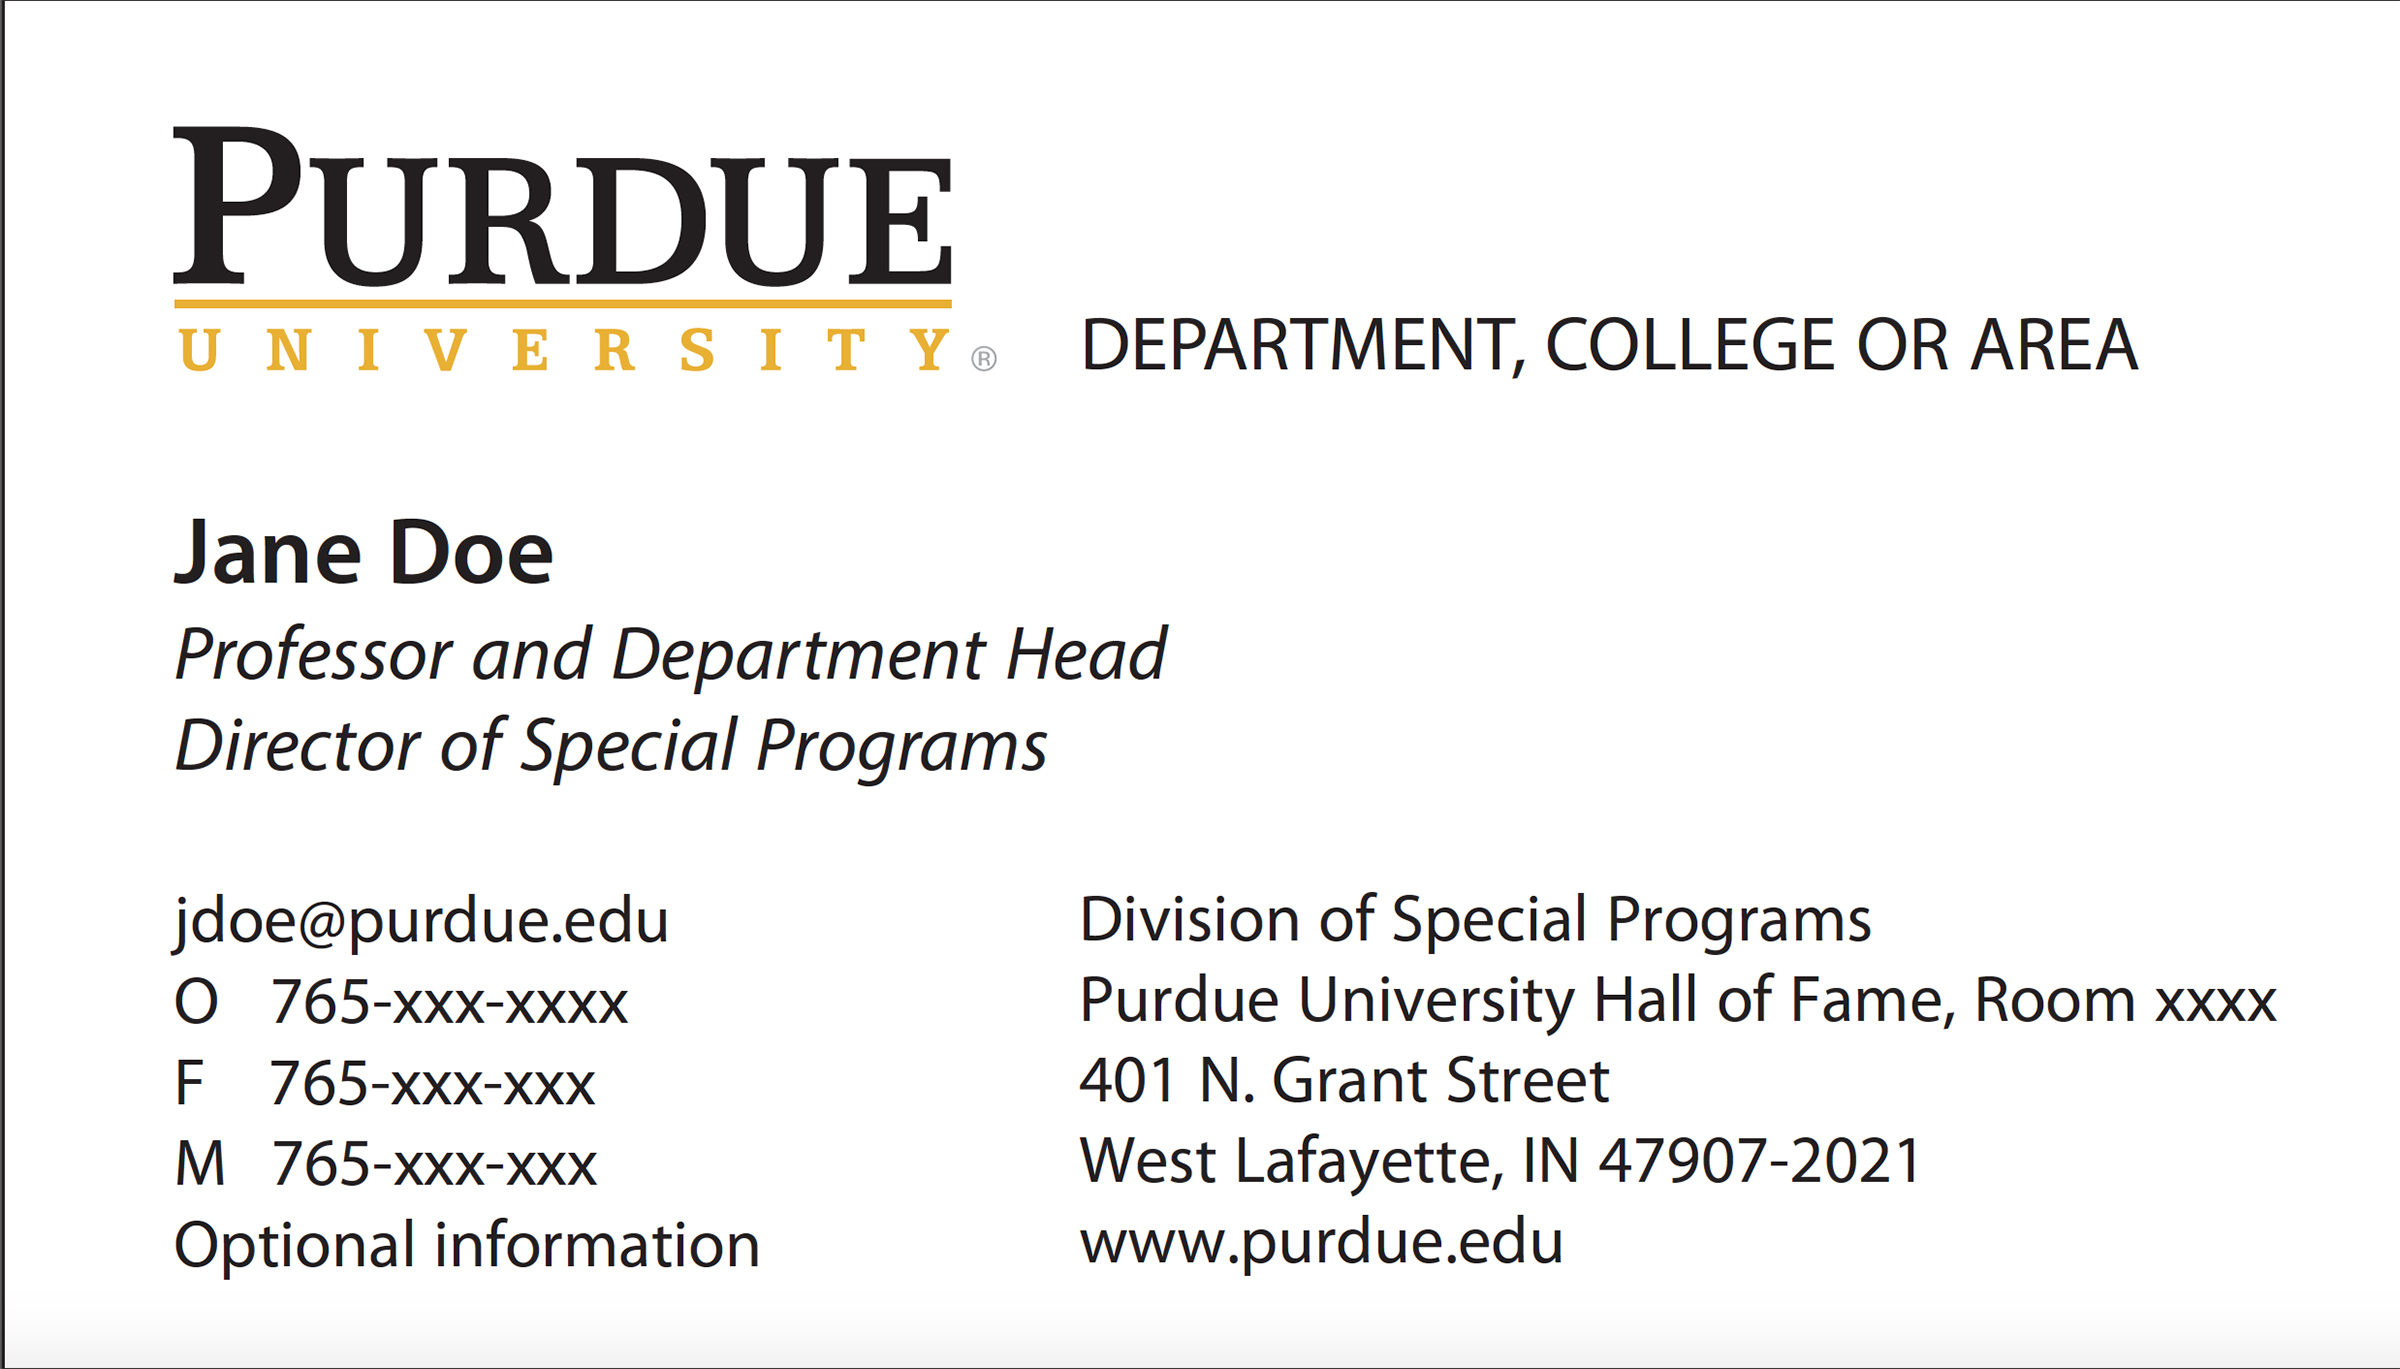 New Business Card Template Now Online - Purdue University News With Graduate Student Business Cards Template